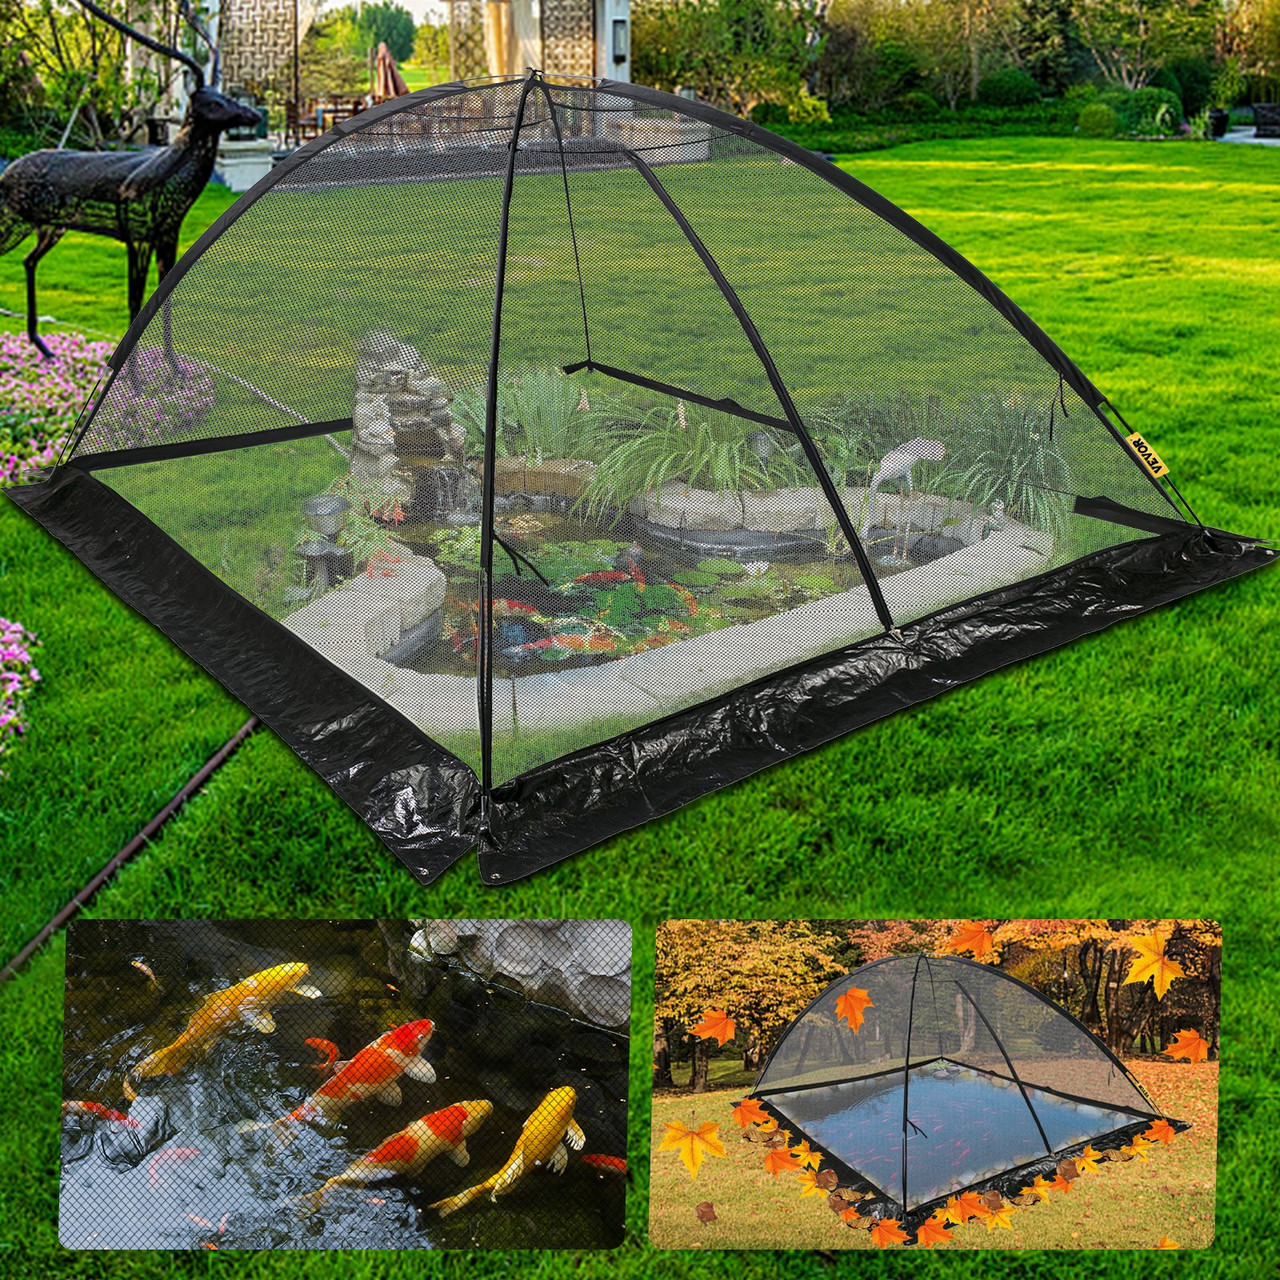 Pond Cover Dome, 9x12 FT Garden Pond Net, 1/2 inch Mesh Dome Pond Net Covers with Zipper and Wind Rope, Black Nylon Pond Netting for Pond Pool and Garden